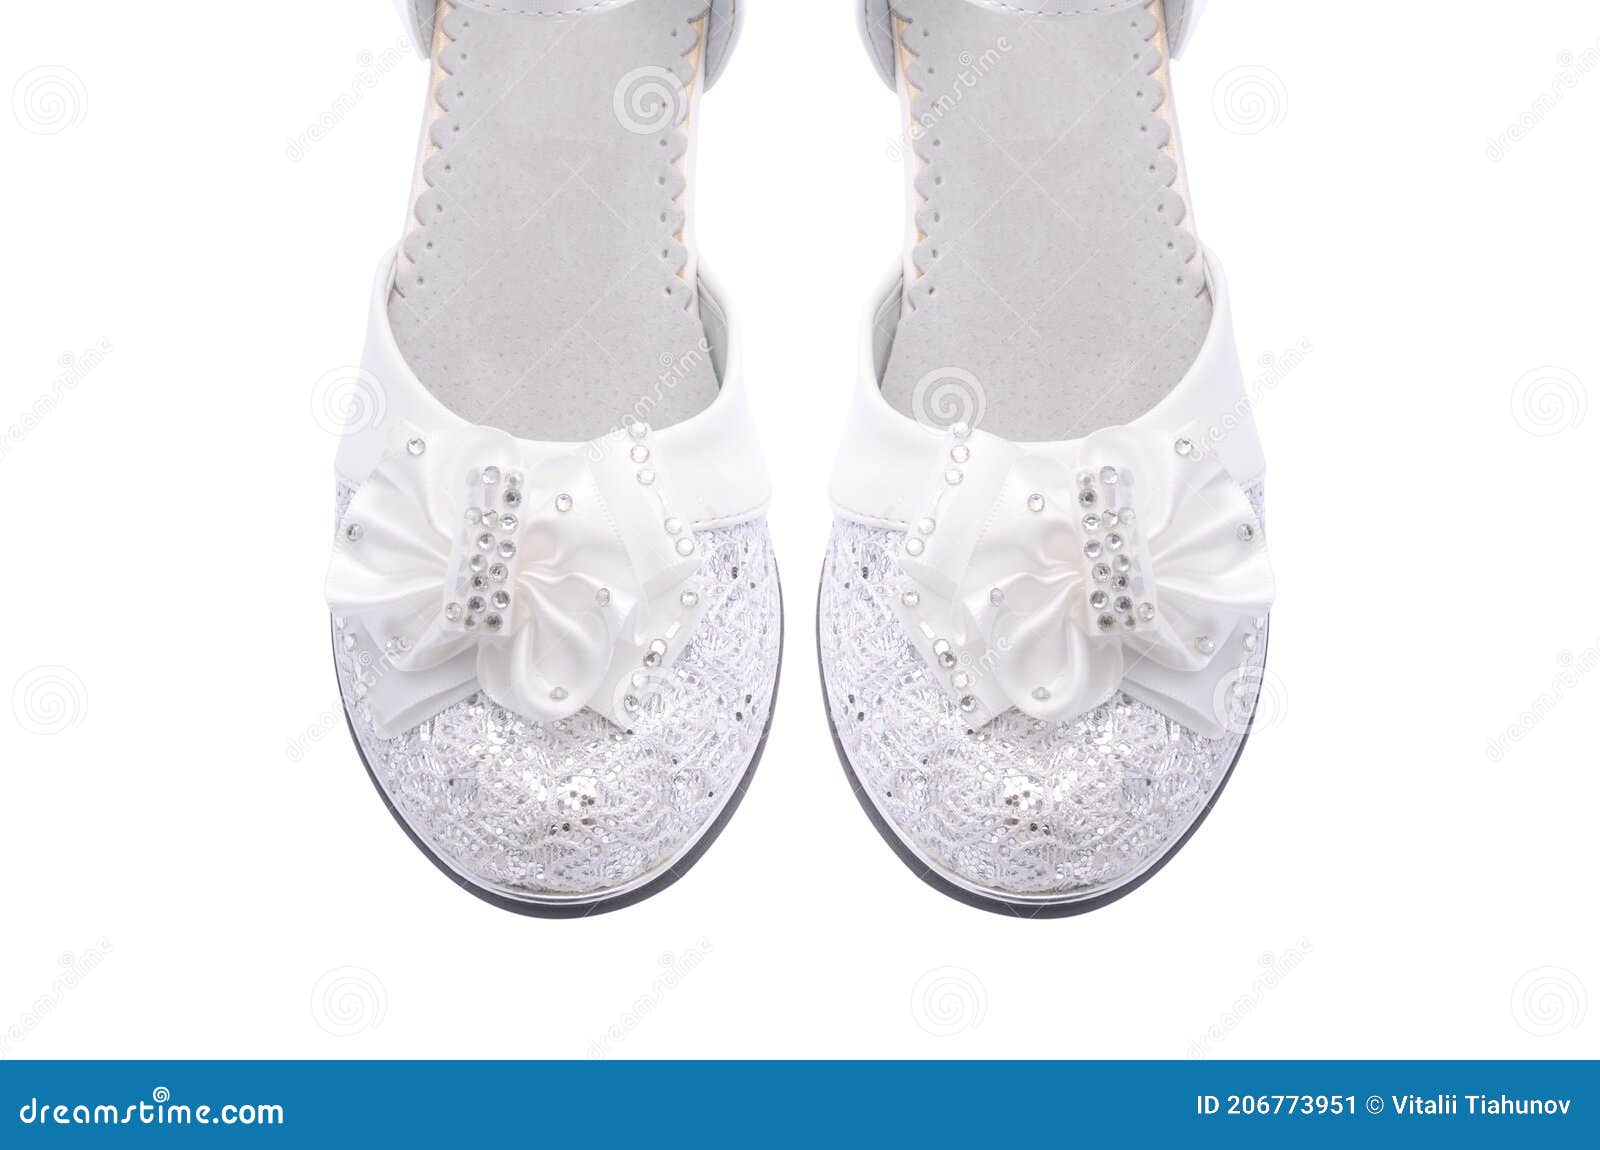 Children Fancy Shoes for Girl Isolated Stock Image - Image of classic ...